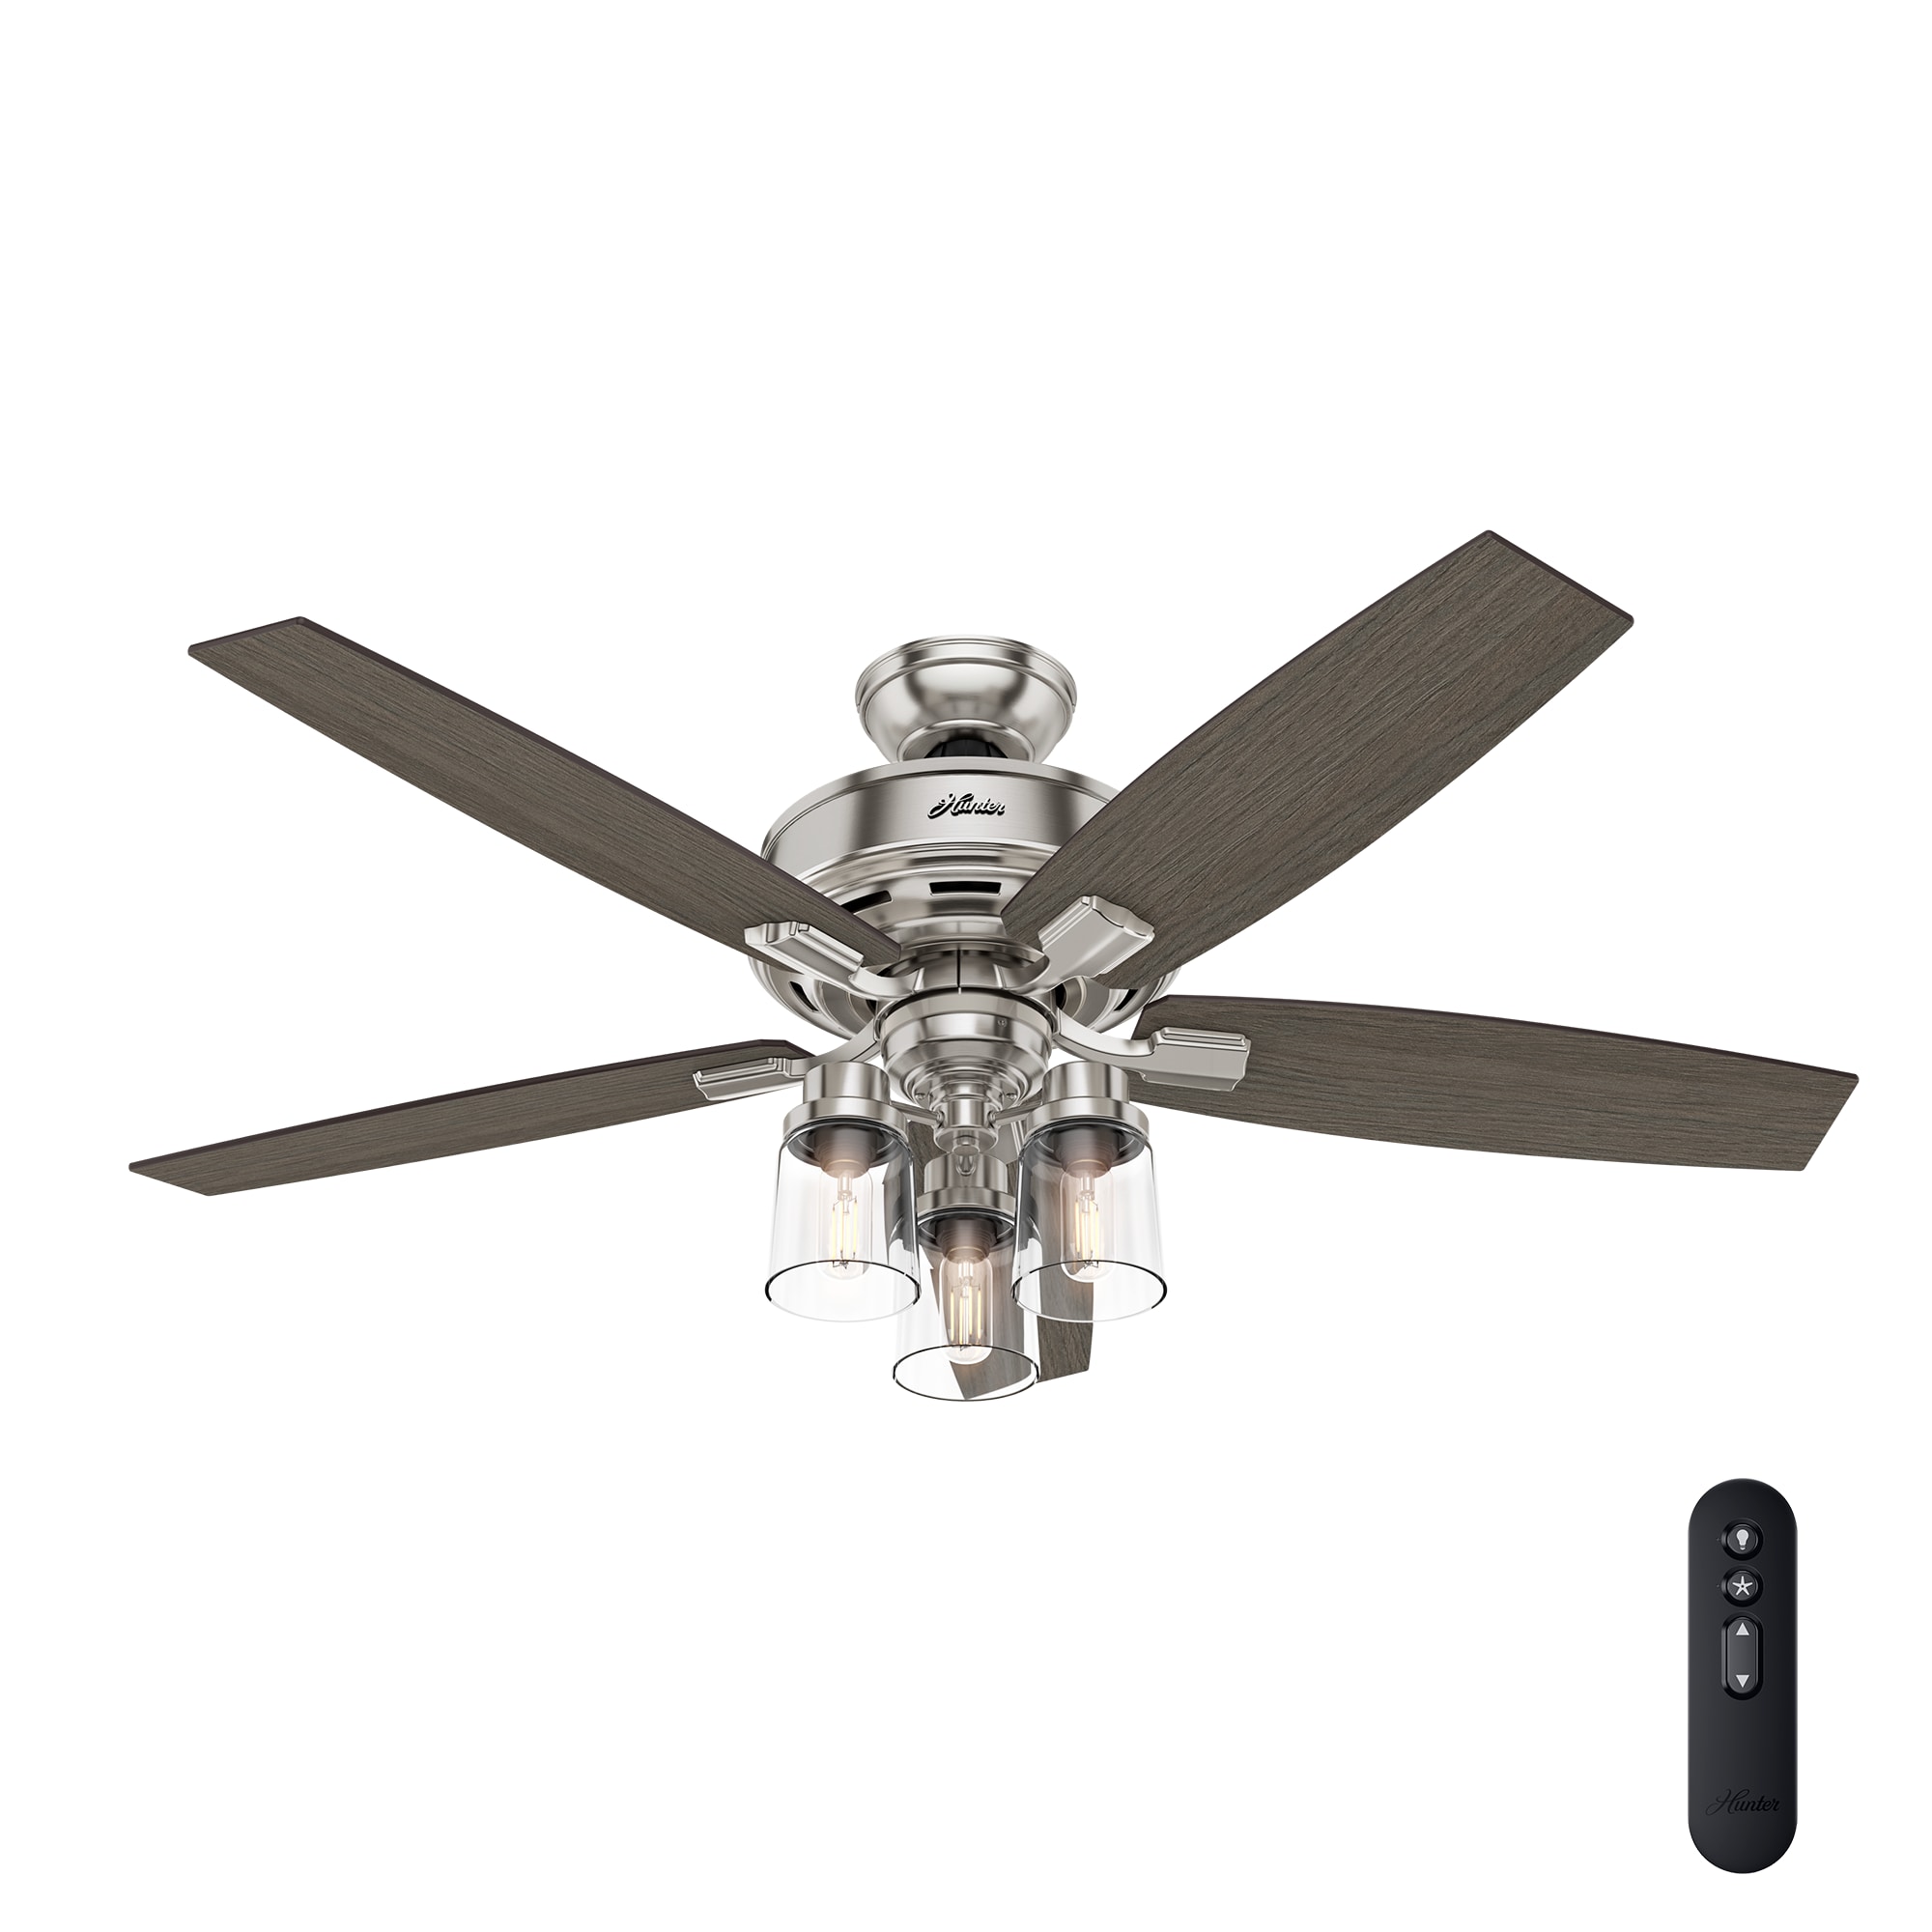 Ceiling Fan With Light Brushed Nickel 3-Blade Maple Walnut Indoor Remote Control 